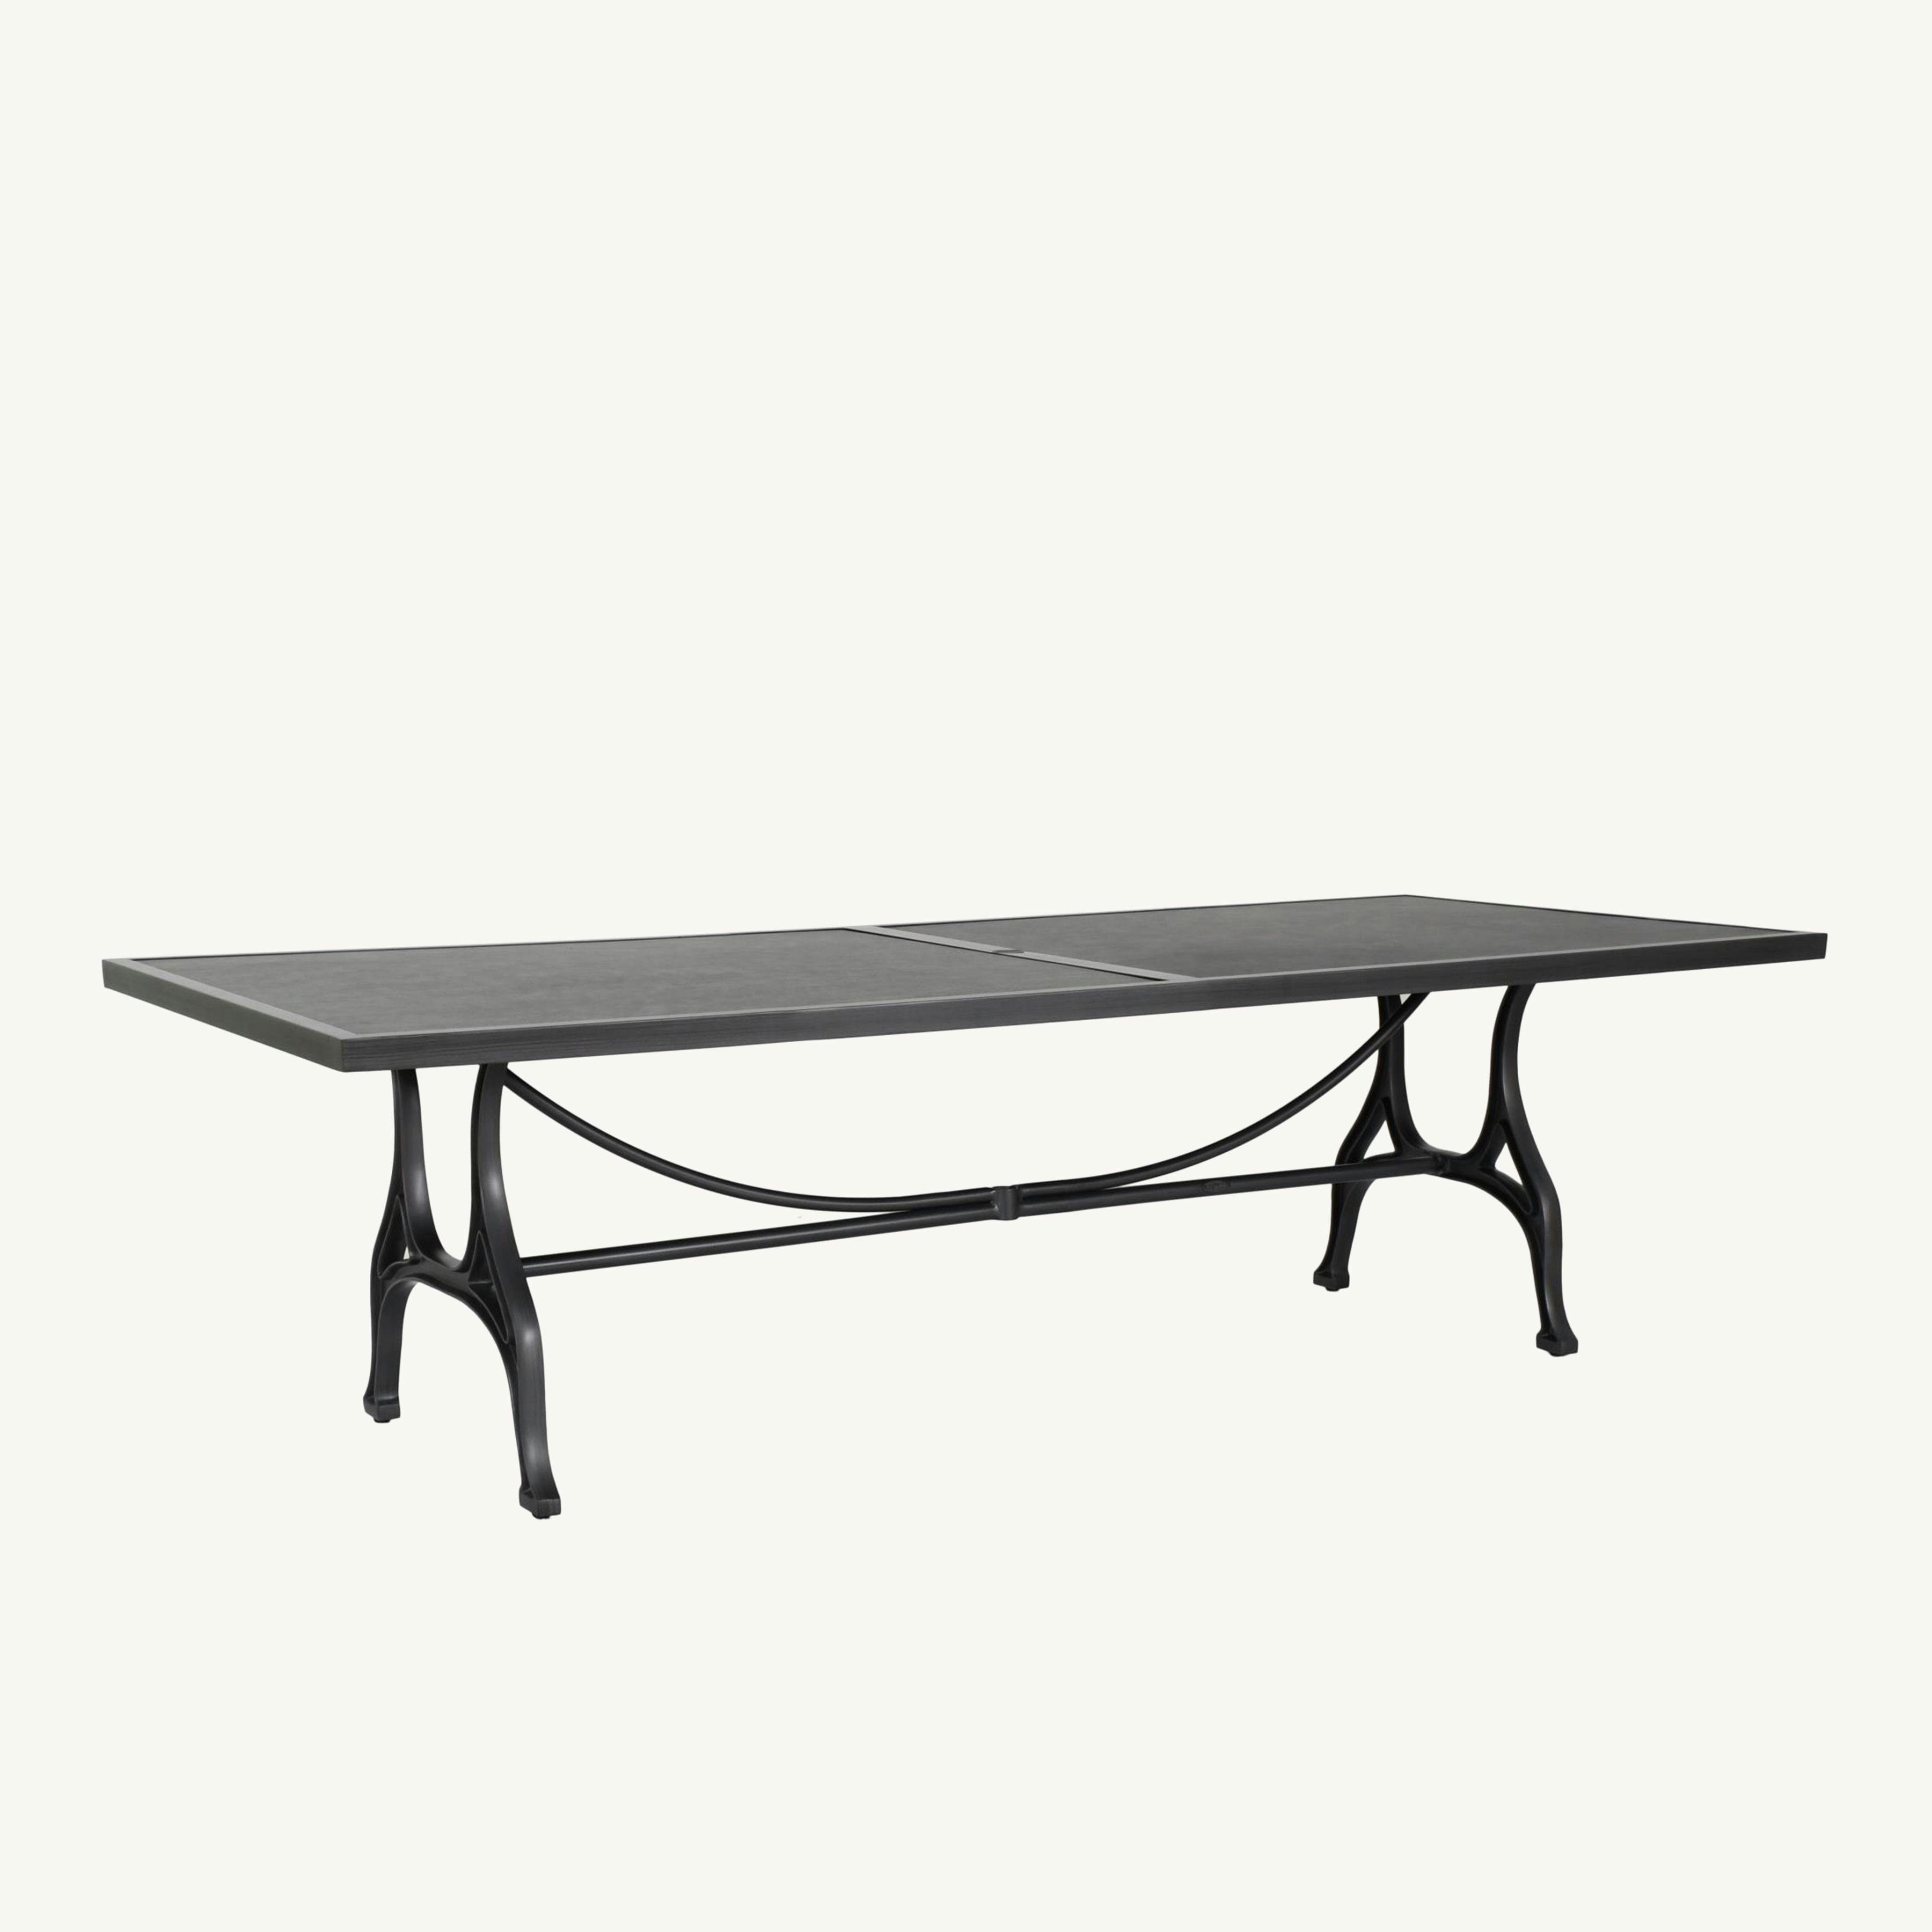 Marquis 42" X 84" Rectangular Dining Table